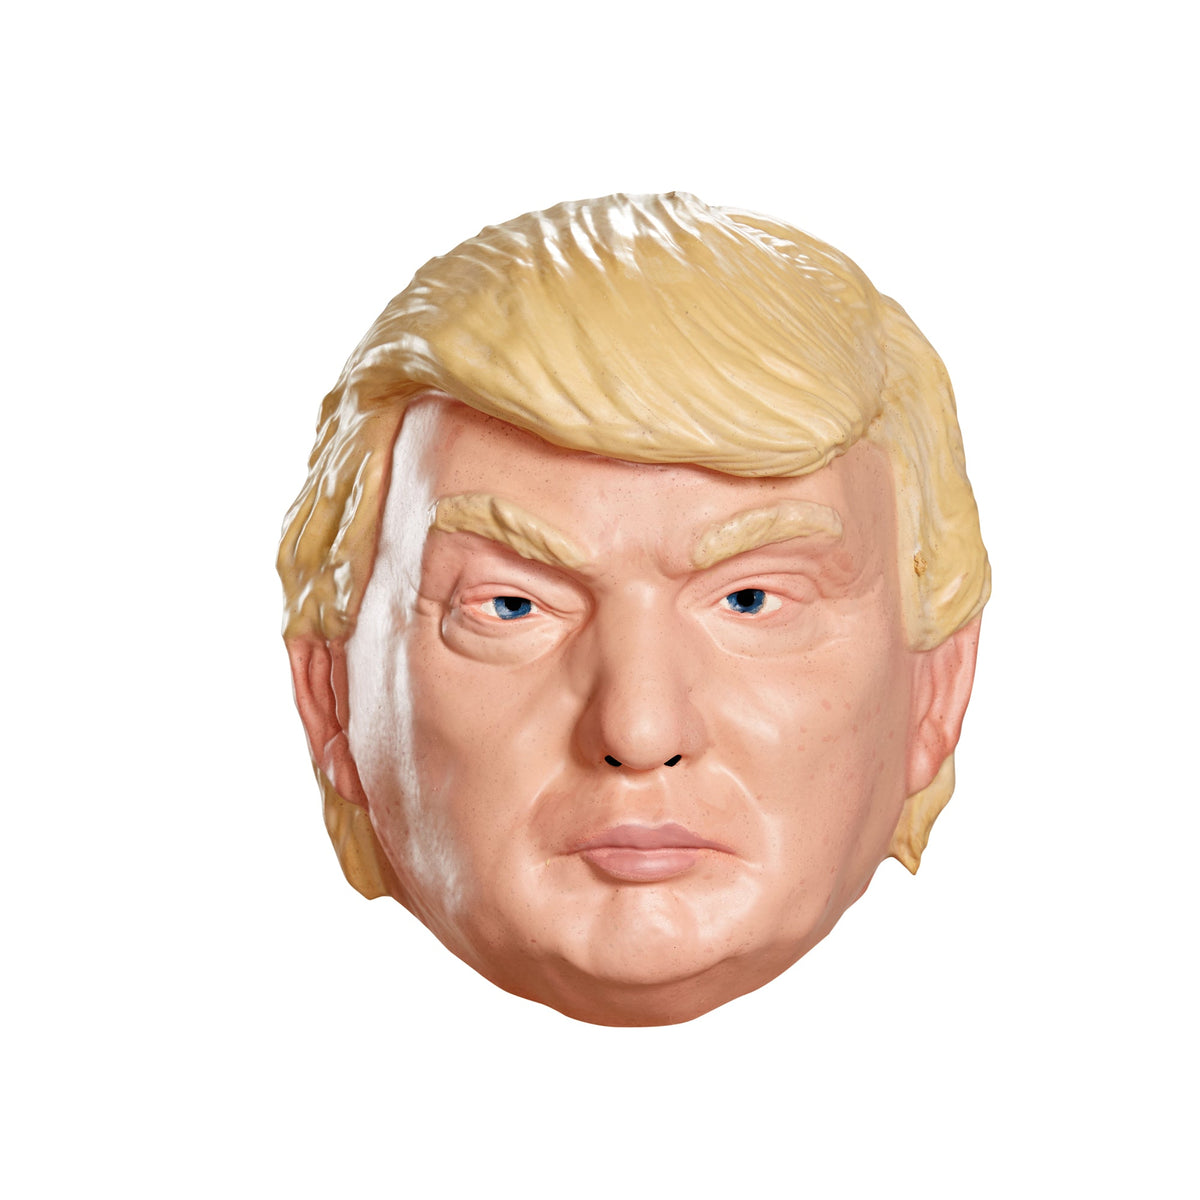 DISGUISE (TOY-SPORT) Costume Accessories Donald Trump Mask 039897169347